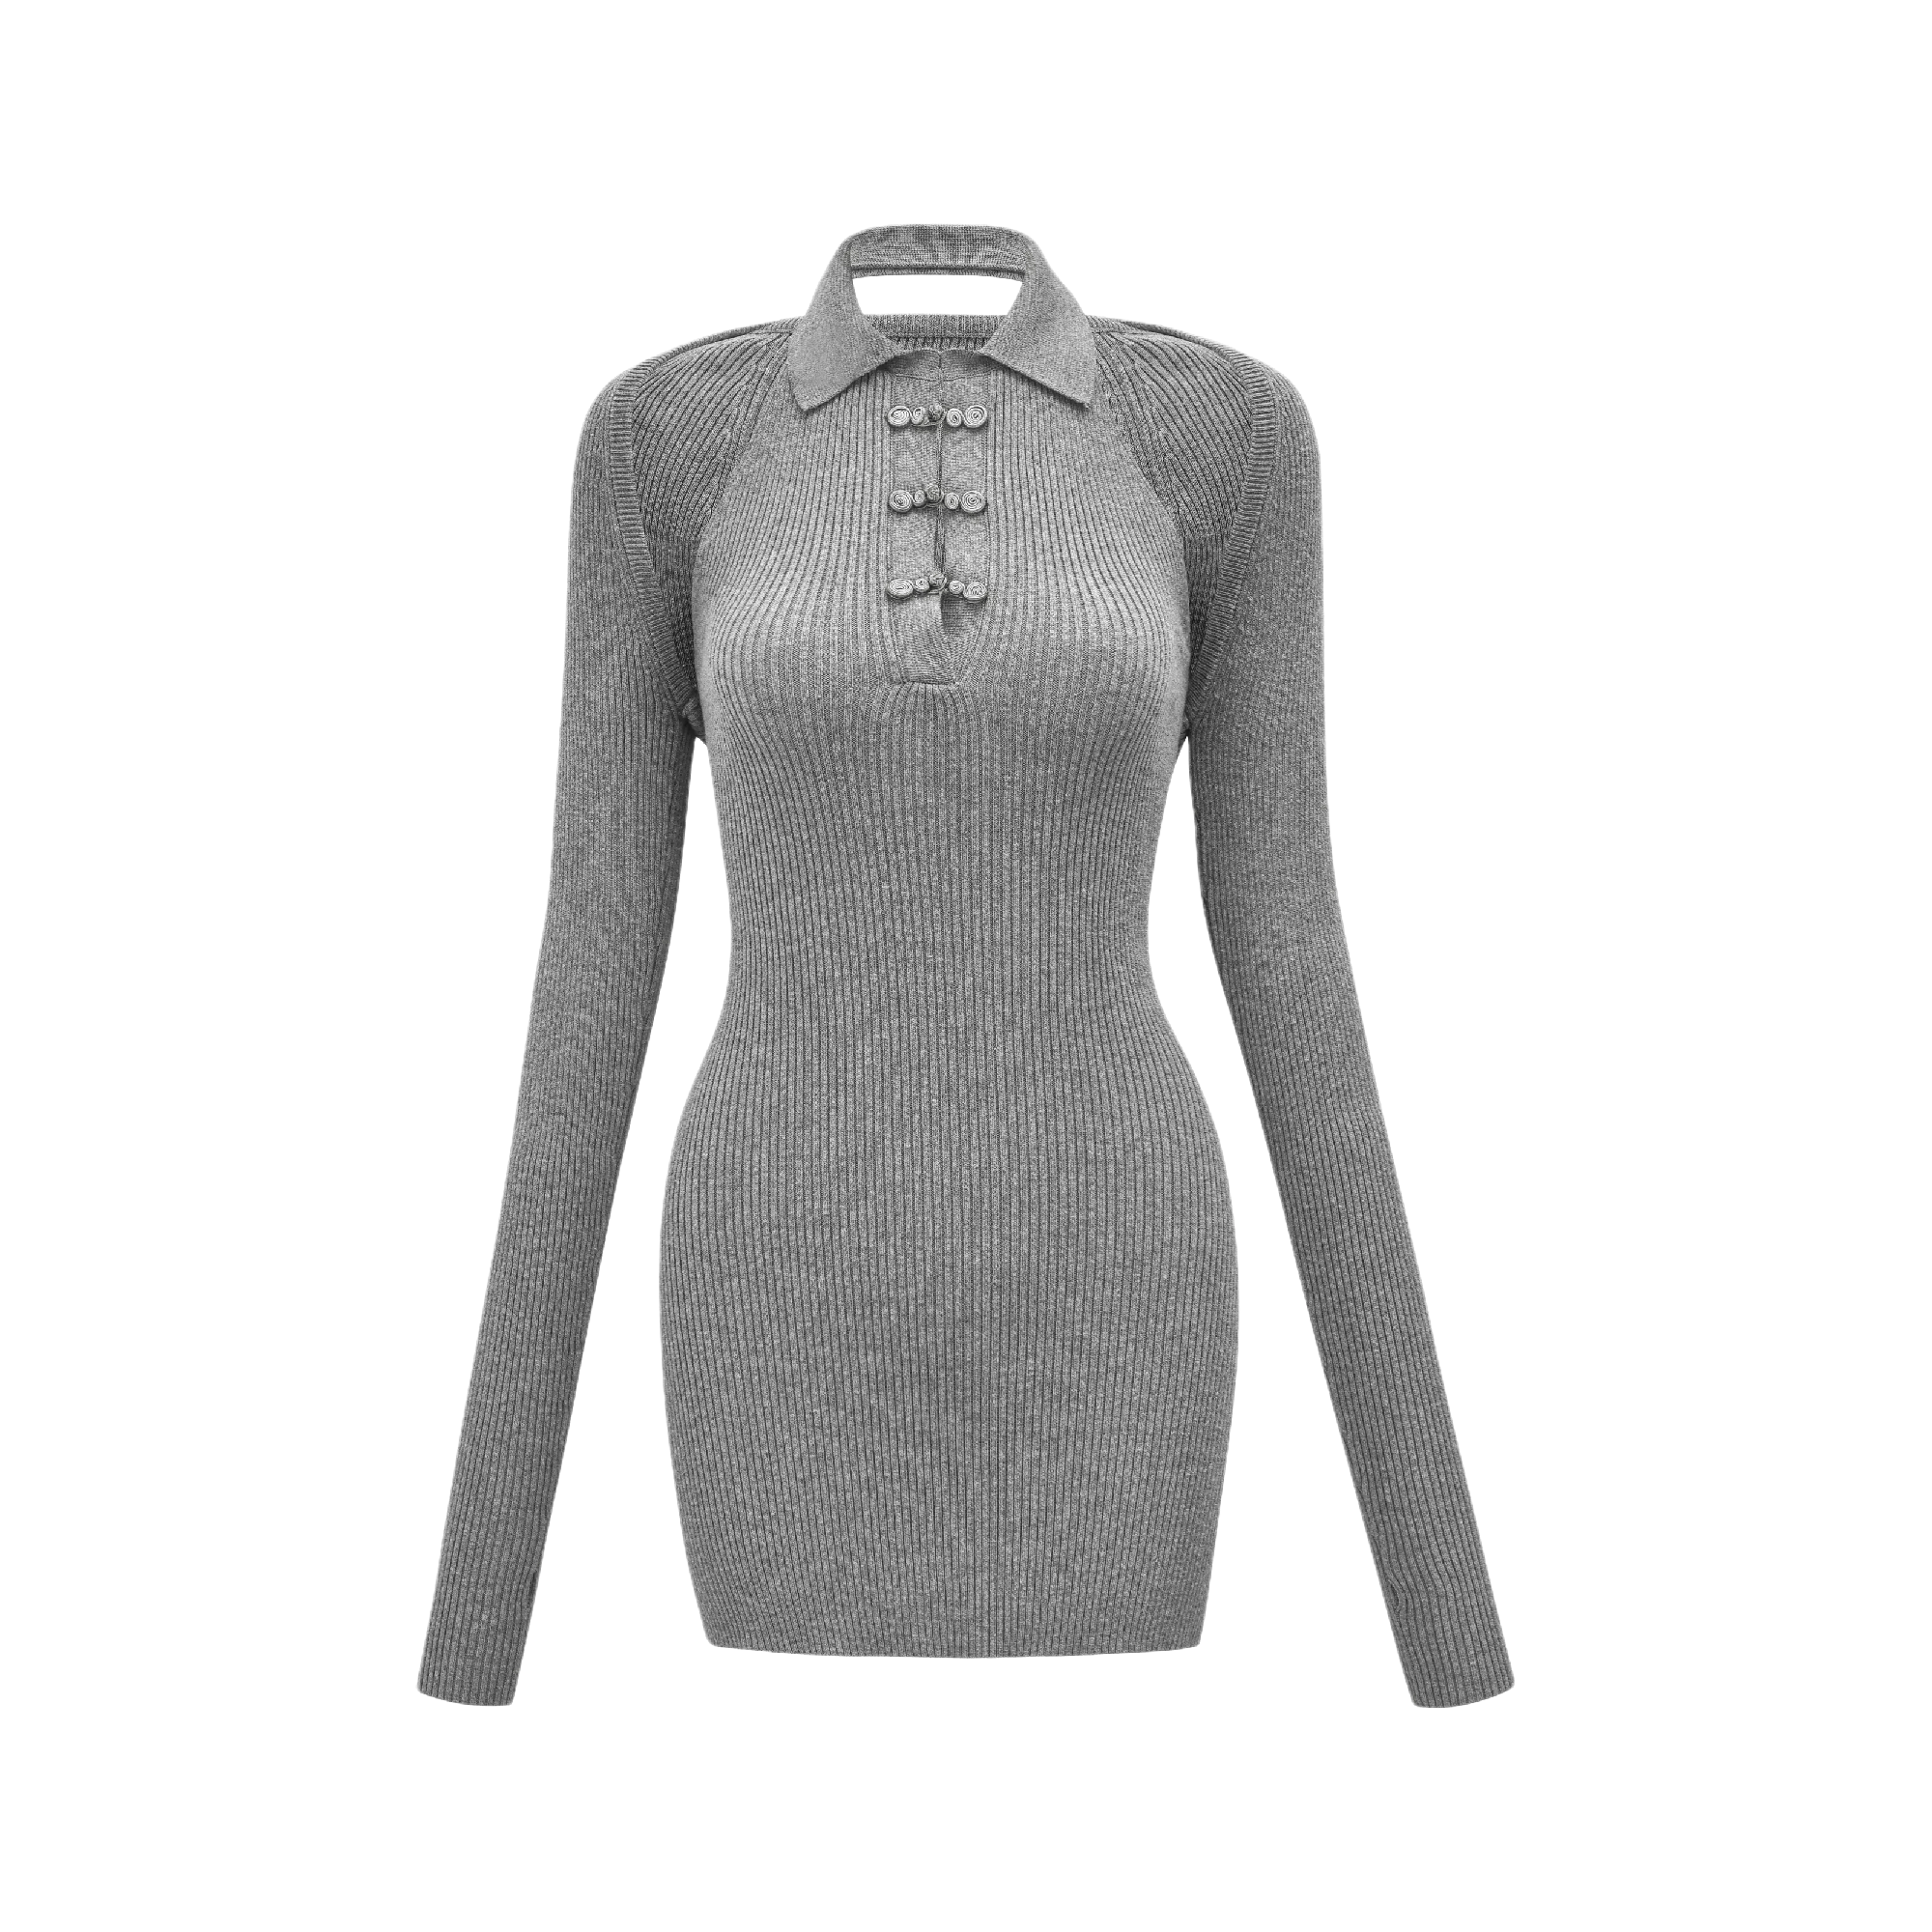 The Lord of the Rings-itsy halterneck knitted mini dress - itsy, it‘z different